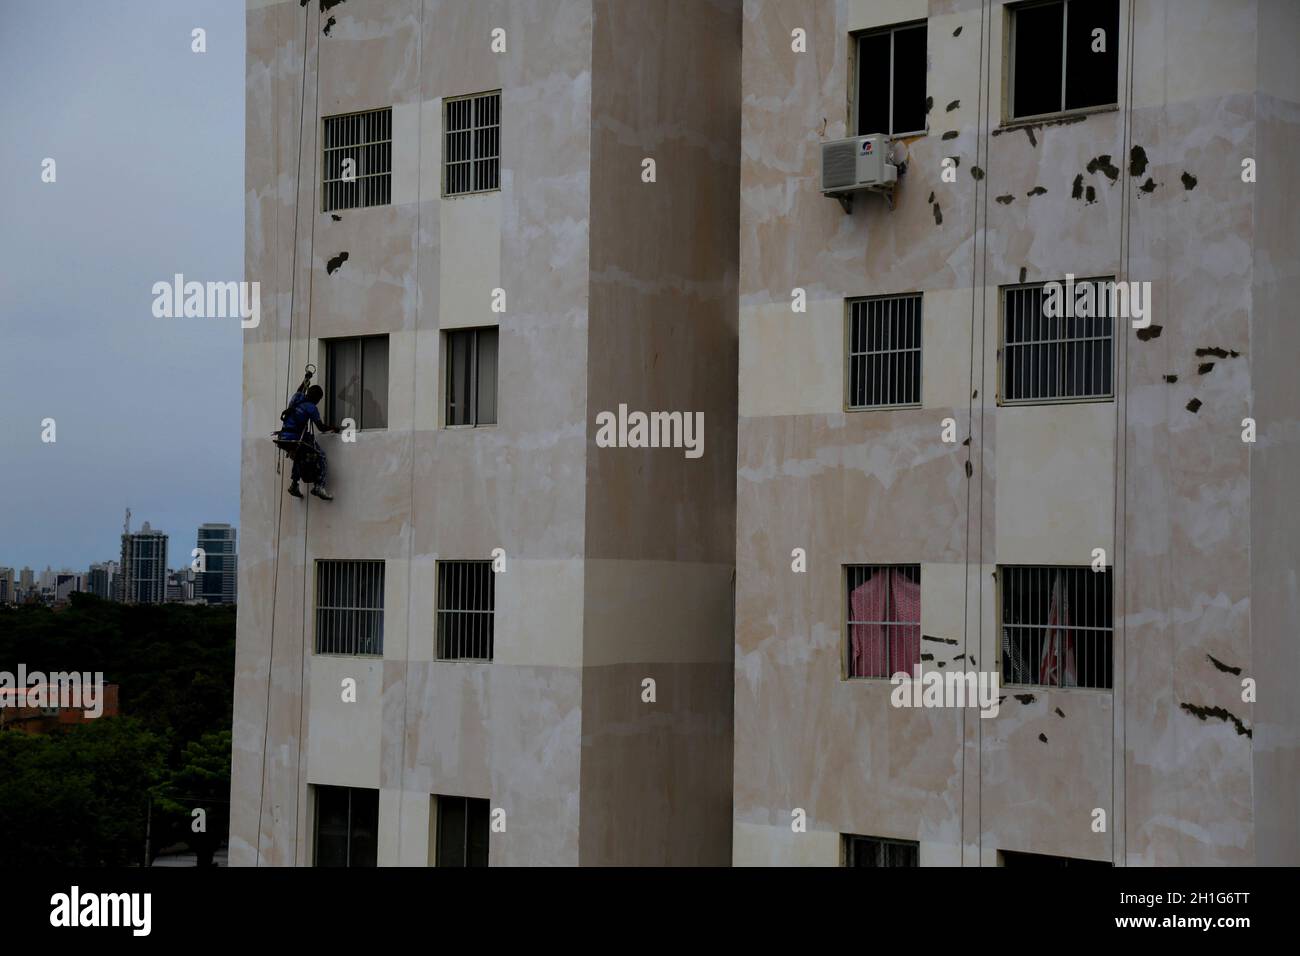 salvador, bahia - brazil - february 24, 2016: wall painter is seen working hanging from ropes on the wall of a thirteen-story building in the Cabula n Stock Photo